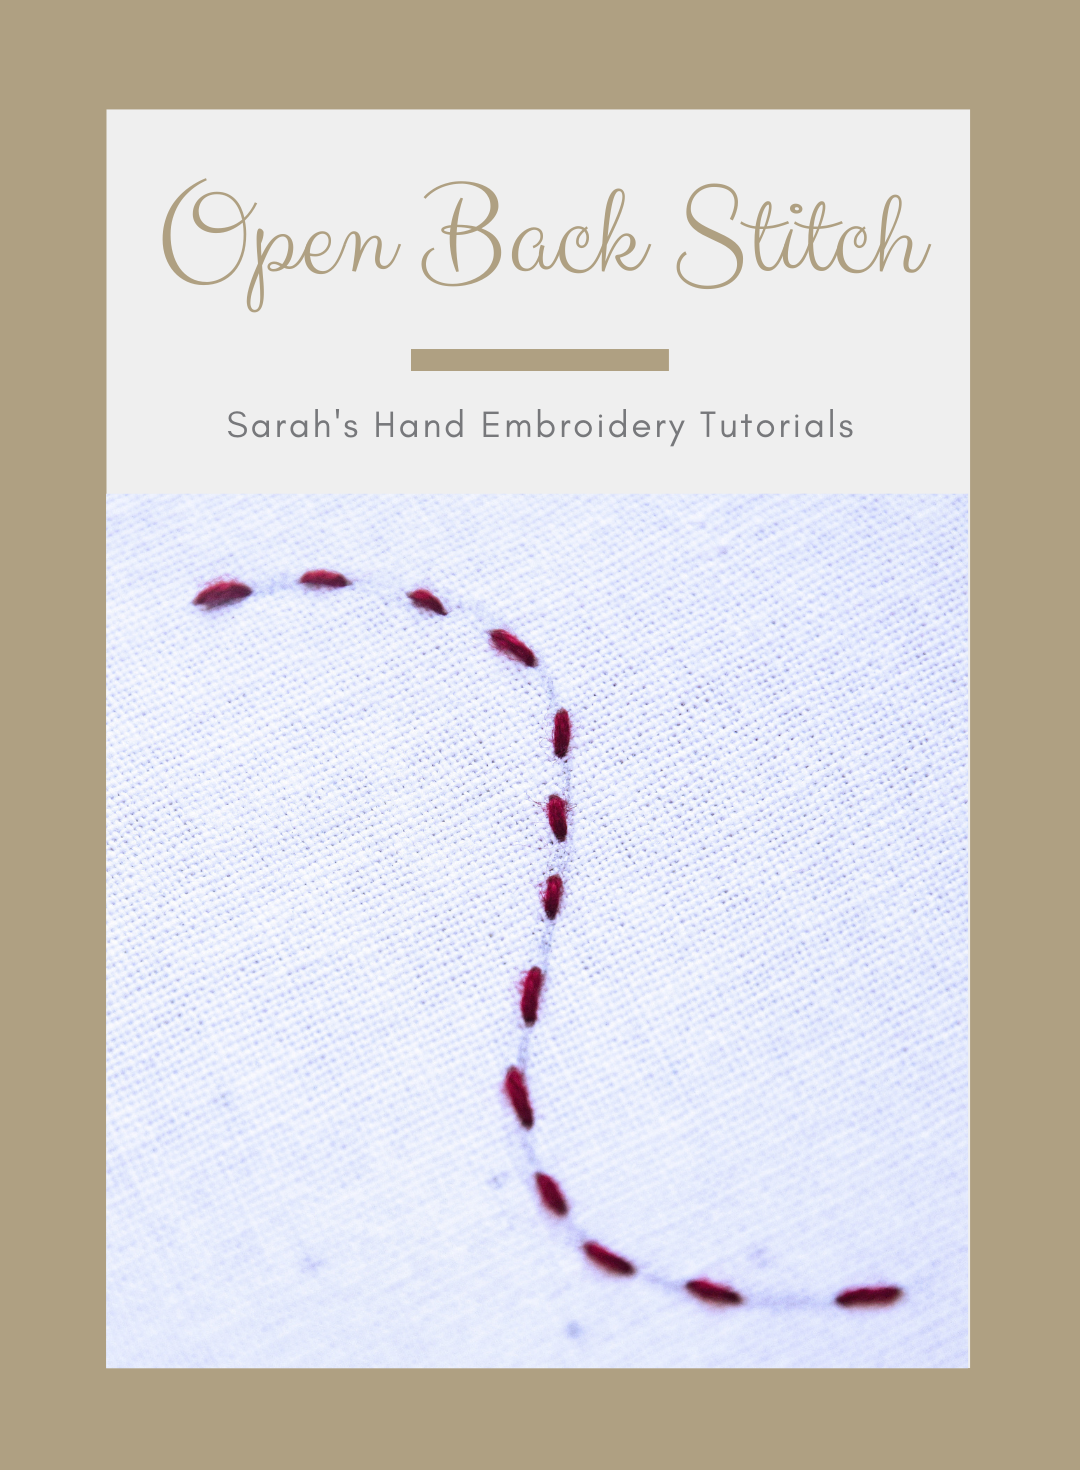 https://www.embroidery.rocksea.org/images/embroidery/open_back_stitch_featured_image.png